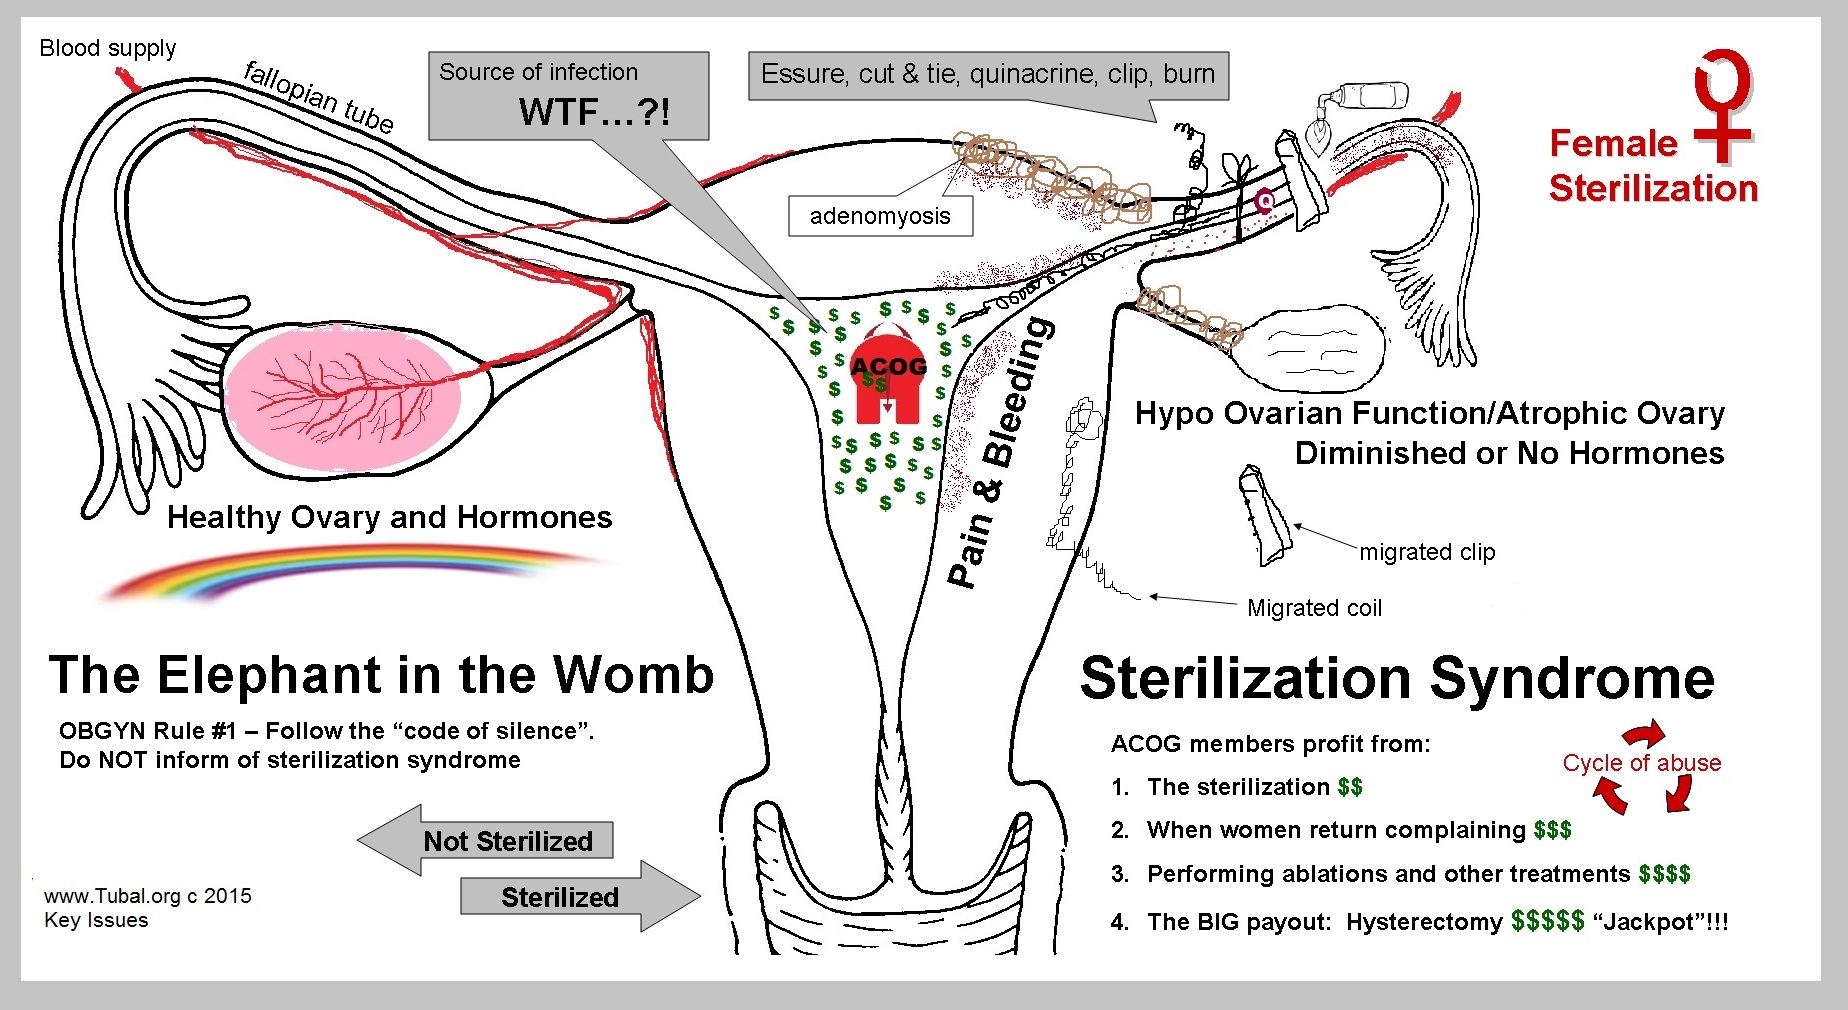 The elephant in the womb - Sterilization Syndrome